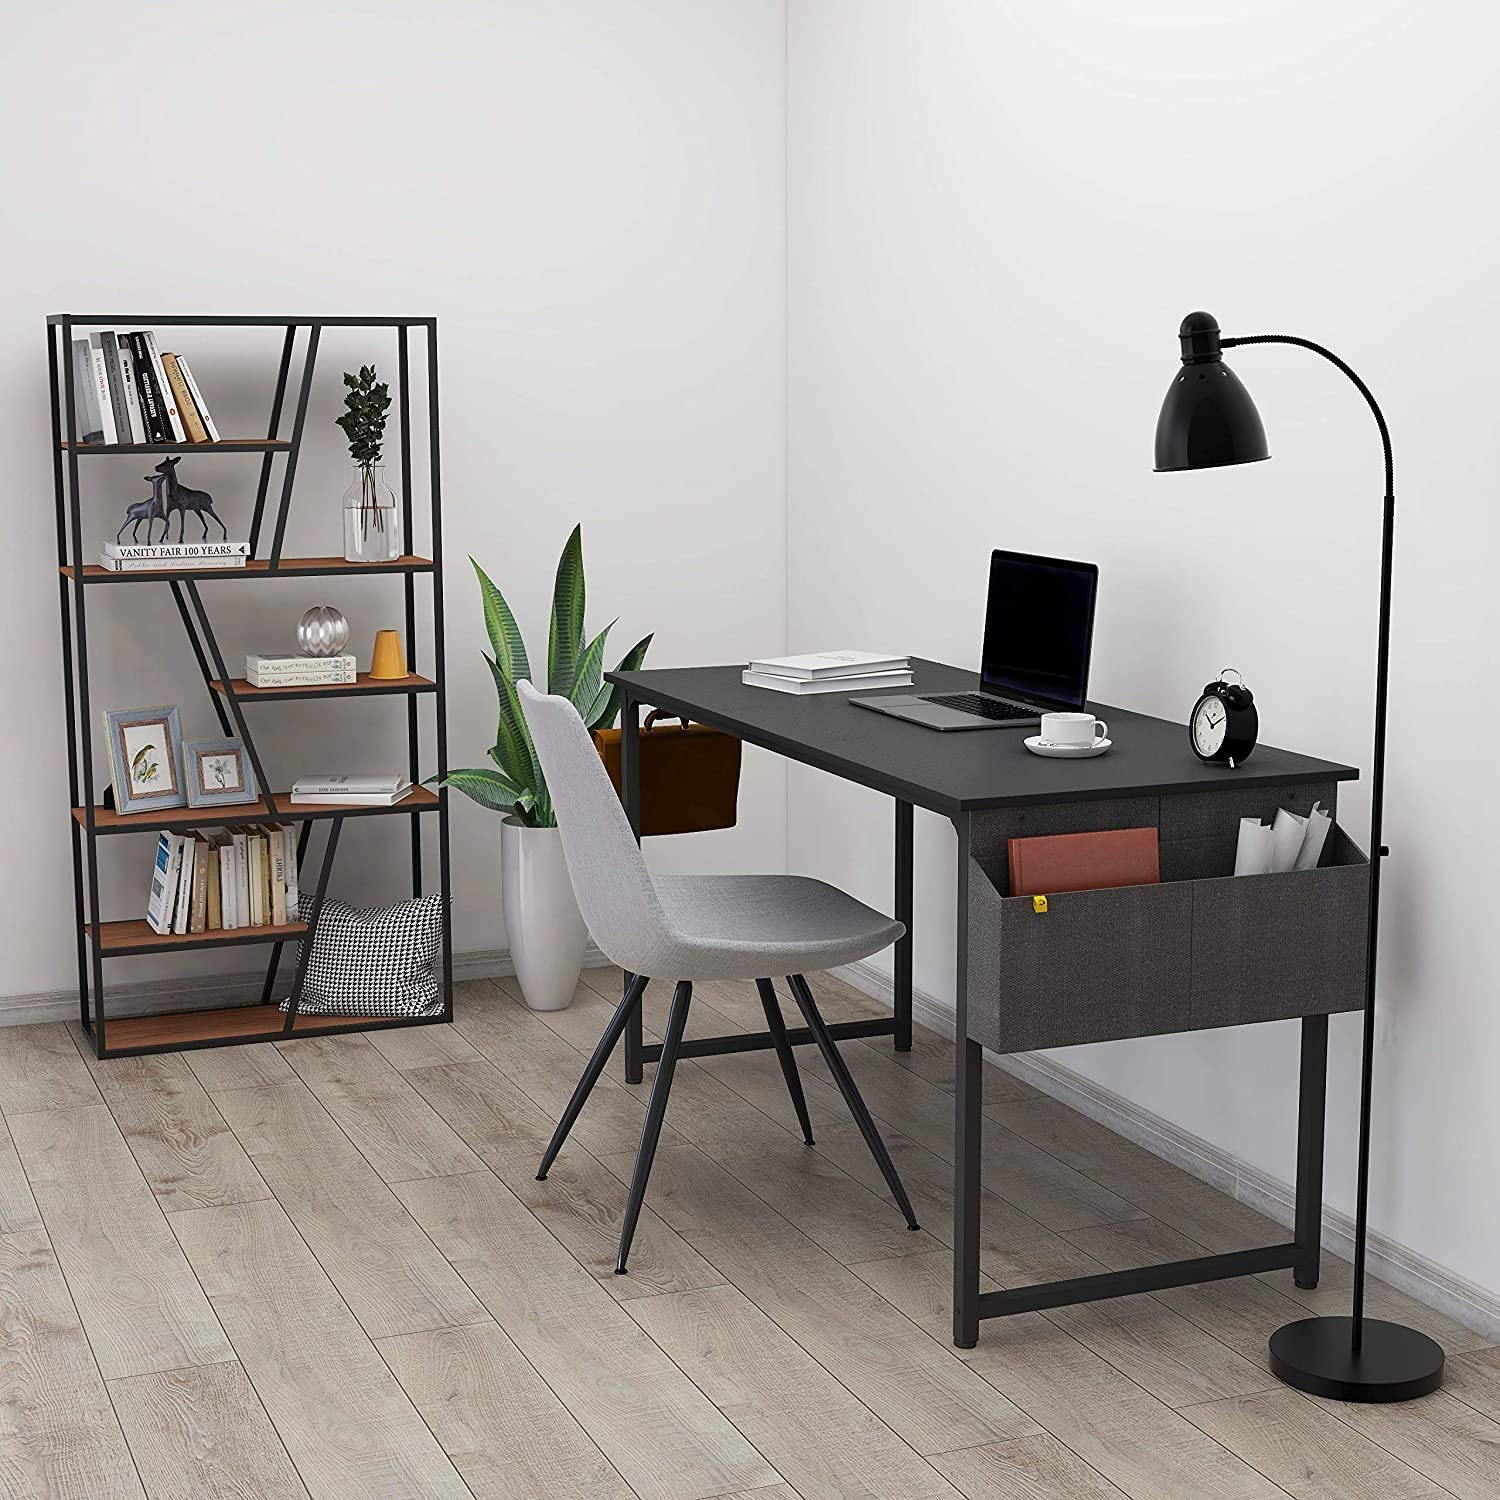 CubiCubi Study Computer Desk 32-Inch Is Great for Small Spaces